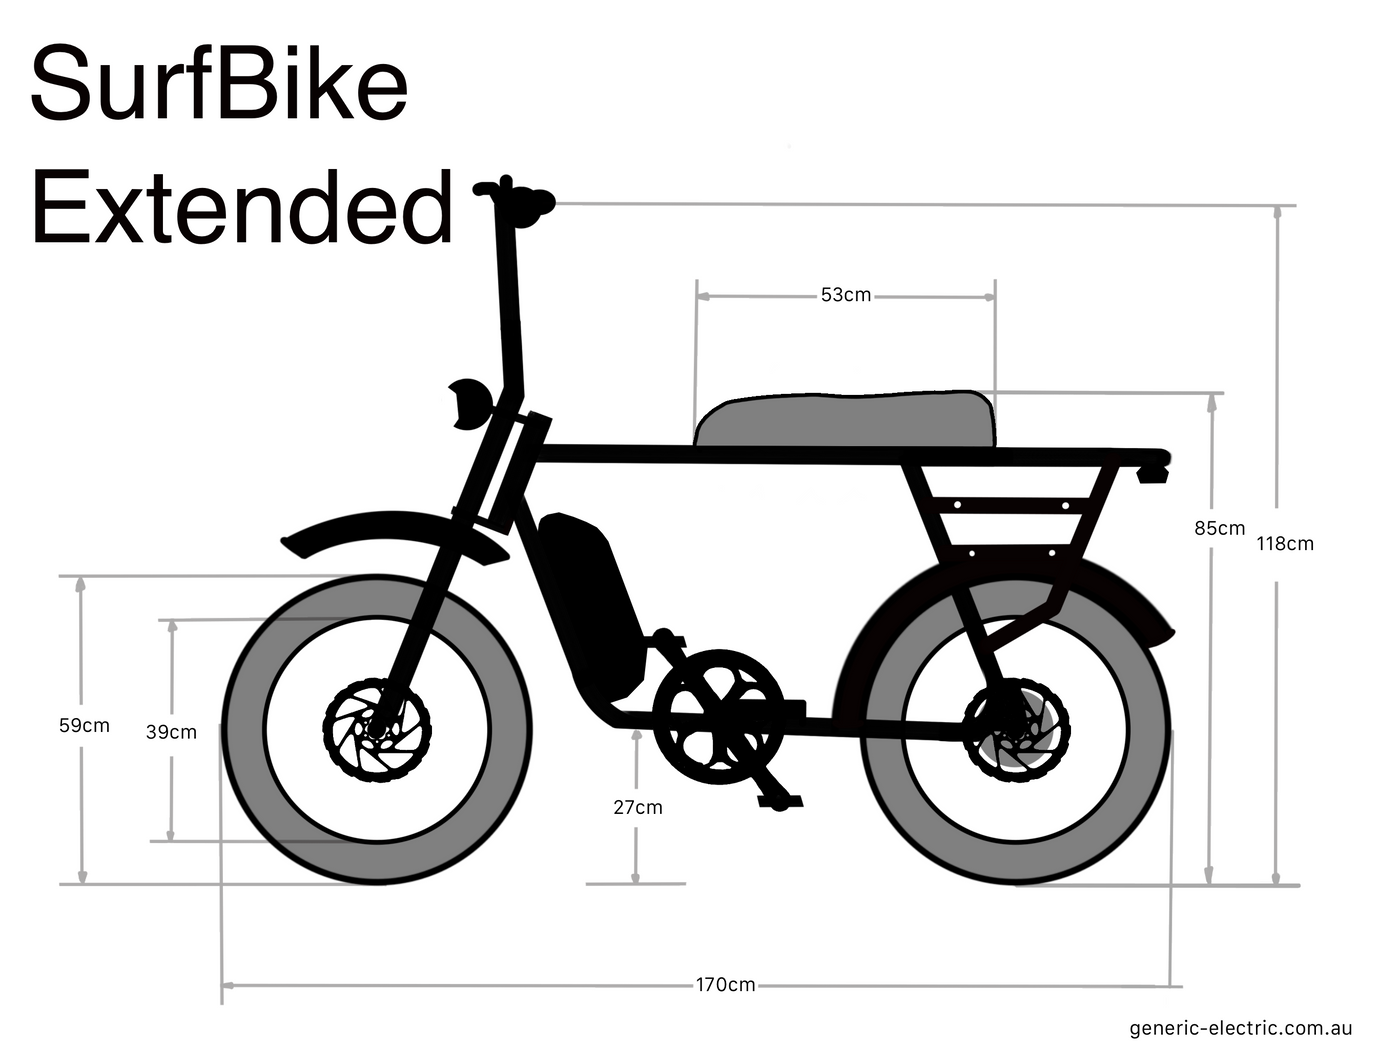 Measurements of the Surfbike Extended ebike, side on, in black and white